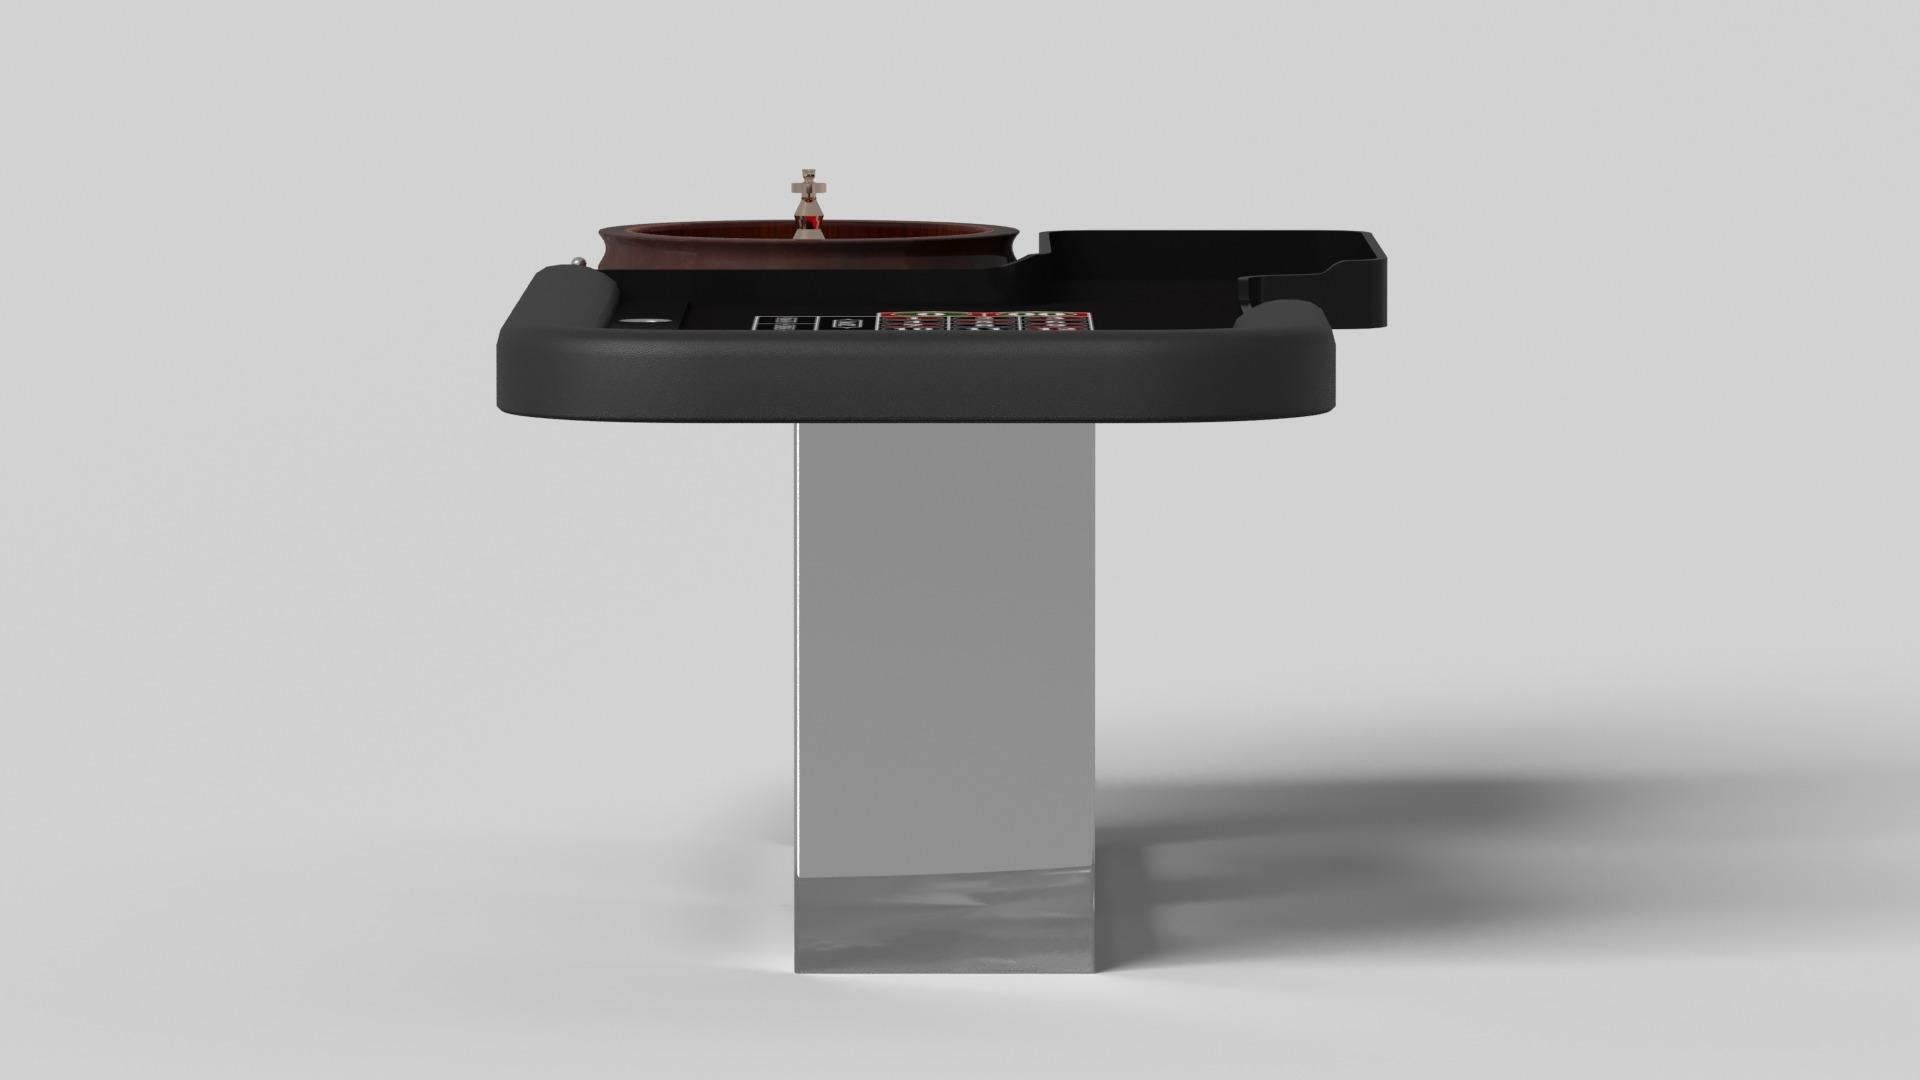 Minimalist Elevate Customs Ambrosia Roulette Table/Stainless Steel Sheet Metal in 8'2